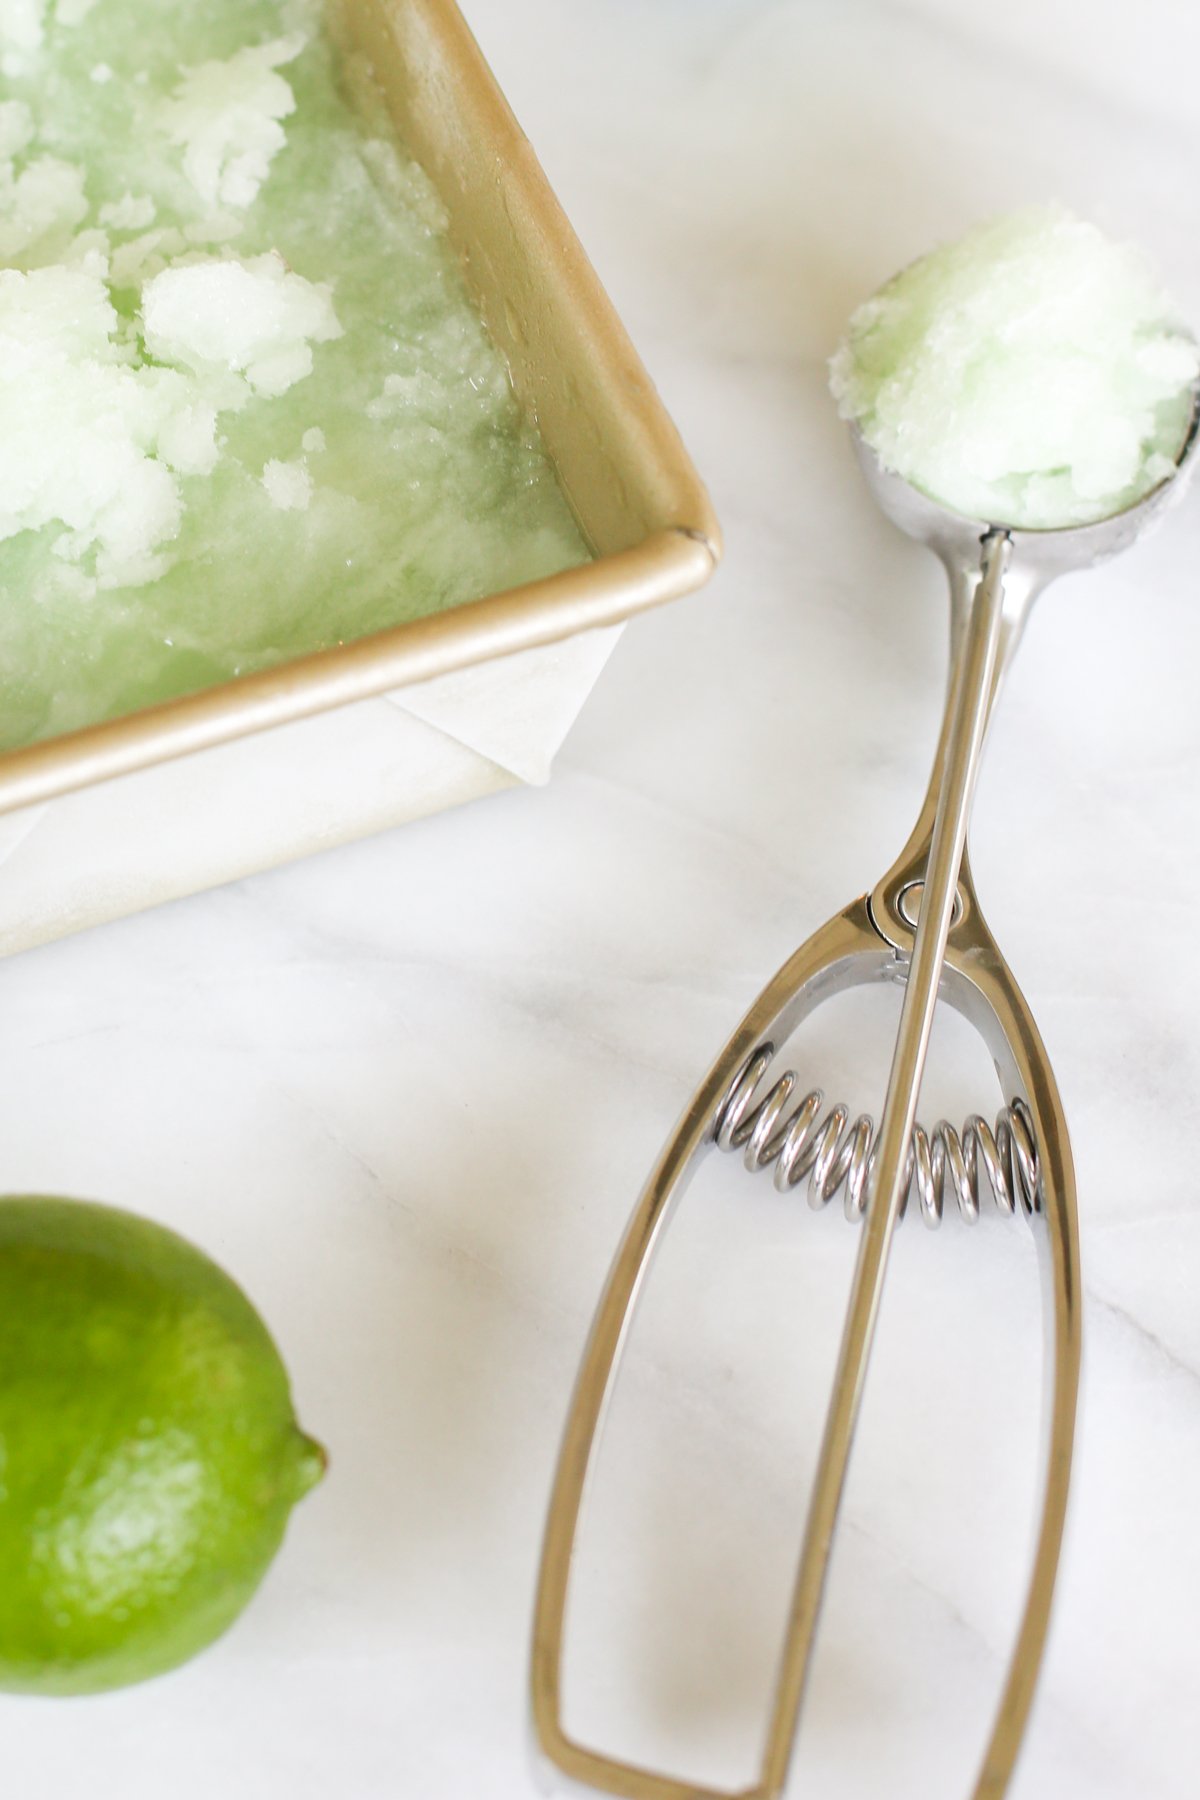 Homemade lime sorbet in a gold loaf pan. A lime and an ice cream scooper are nearby.